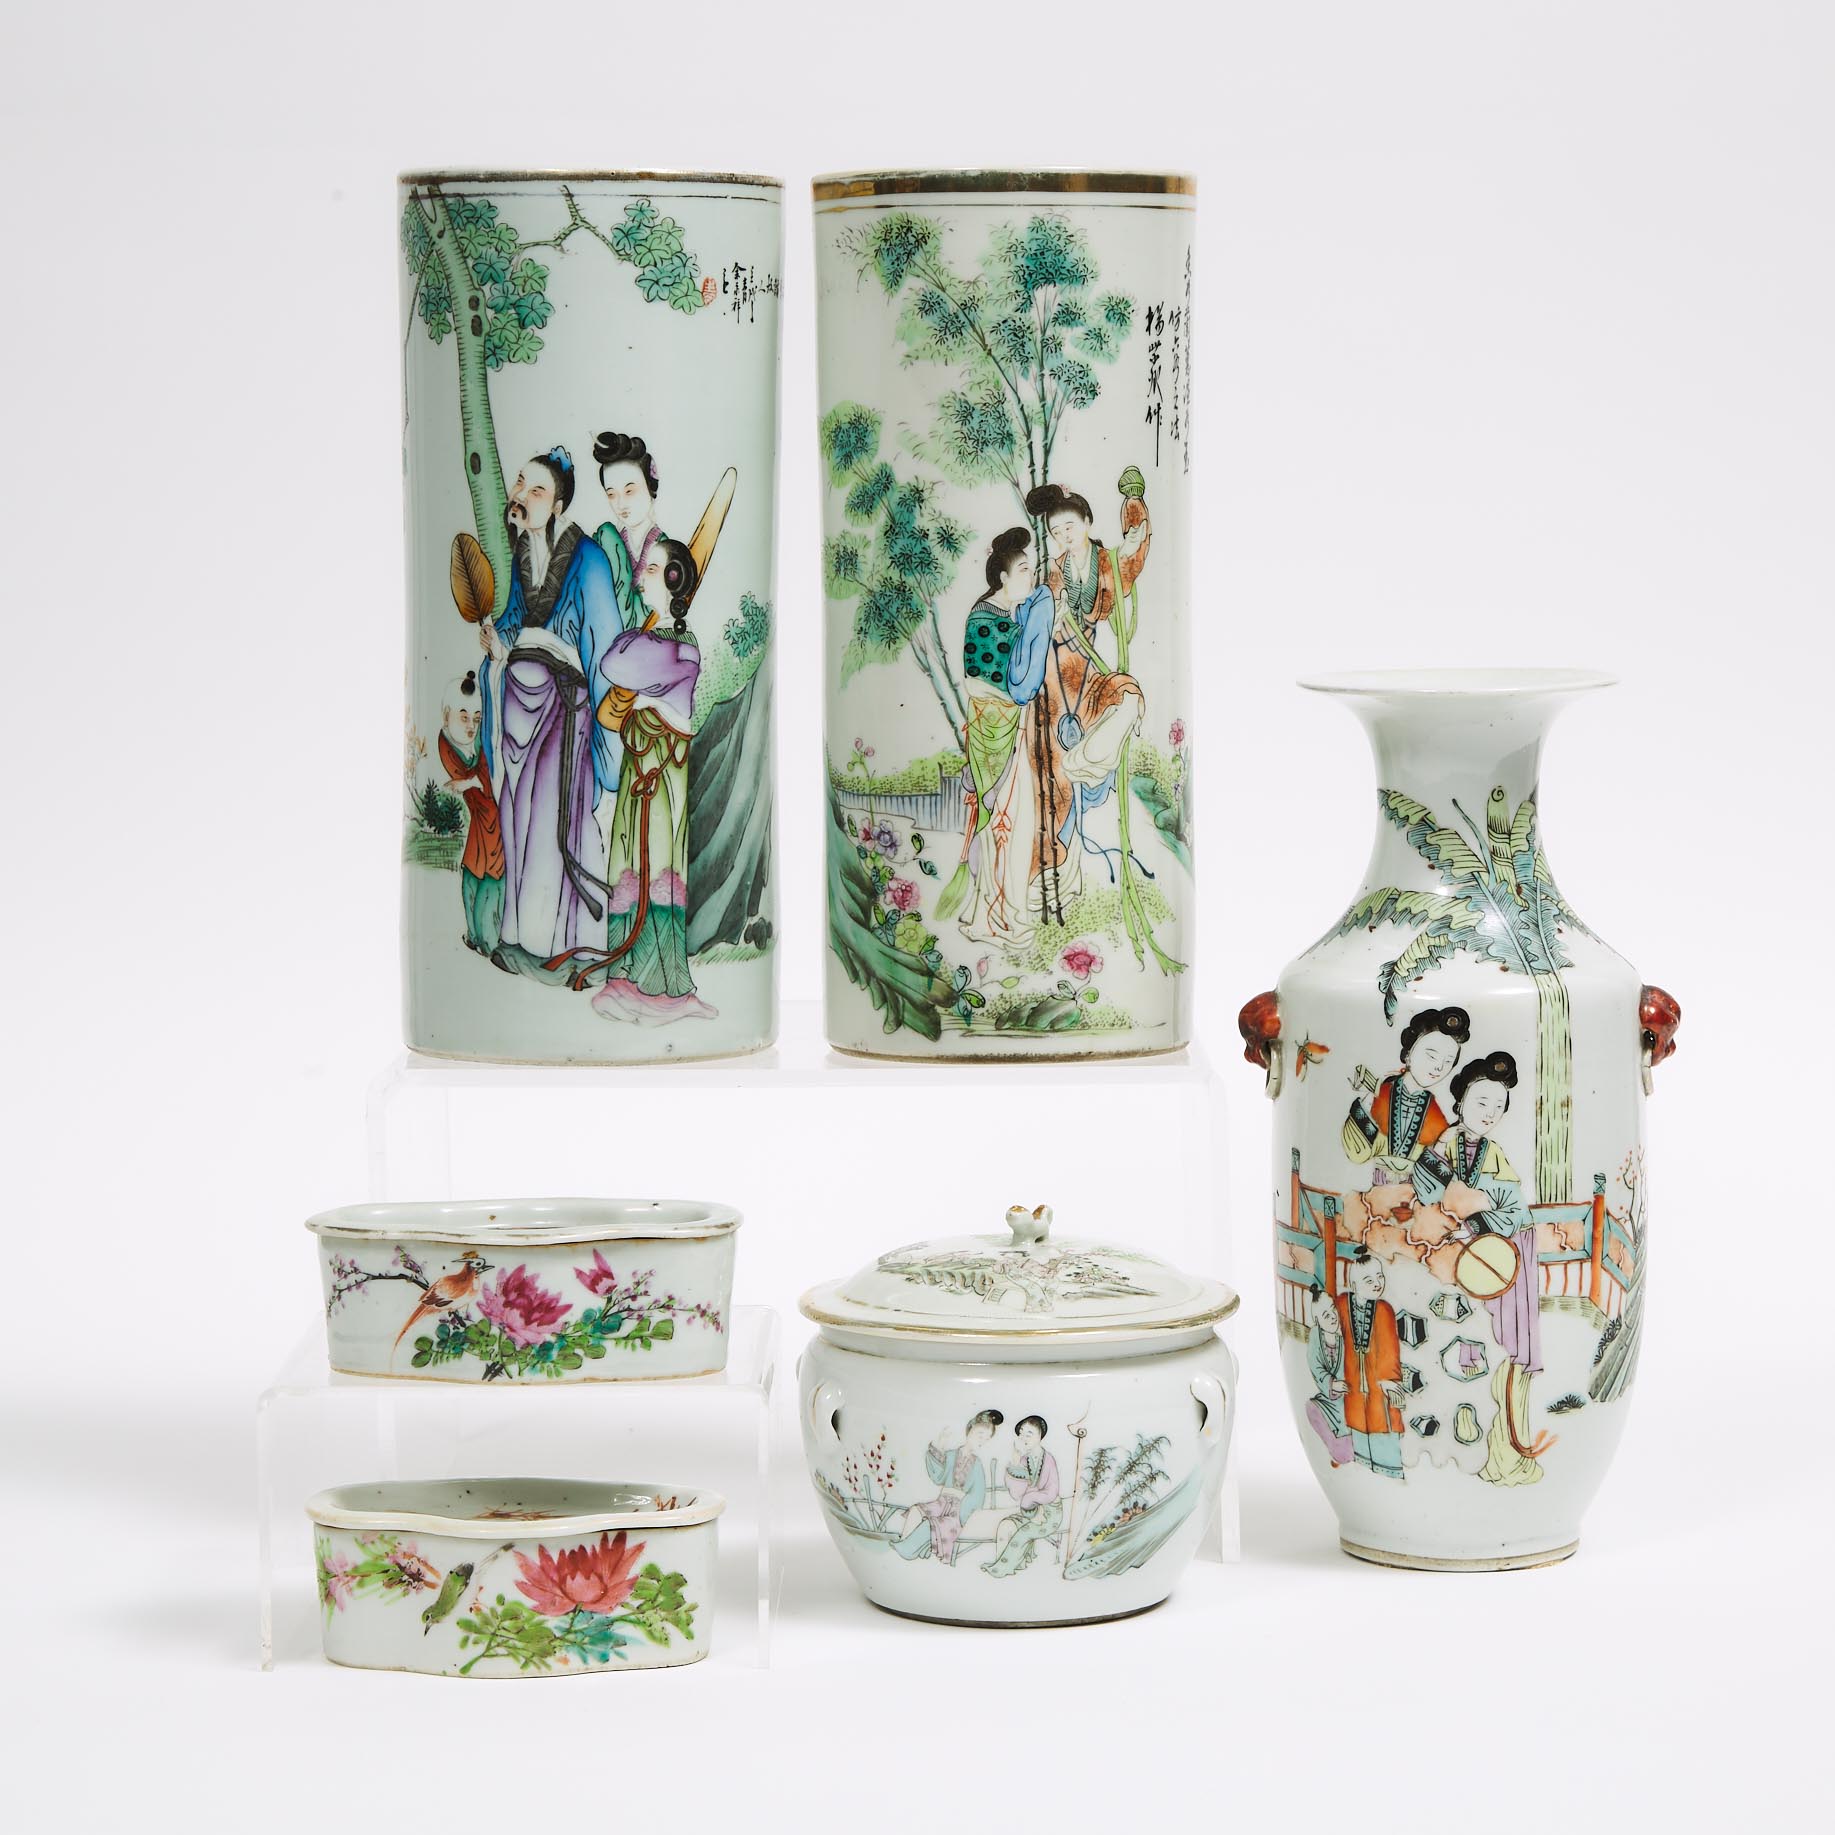 A Group of Six Enameled Porcelain Wares, Republican Period